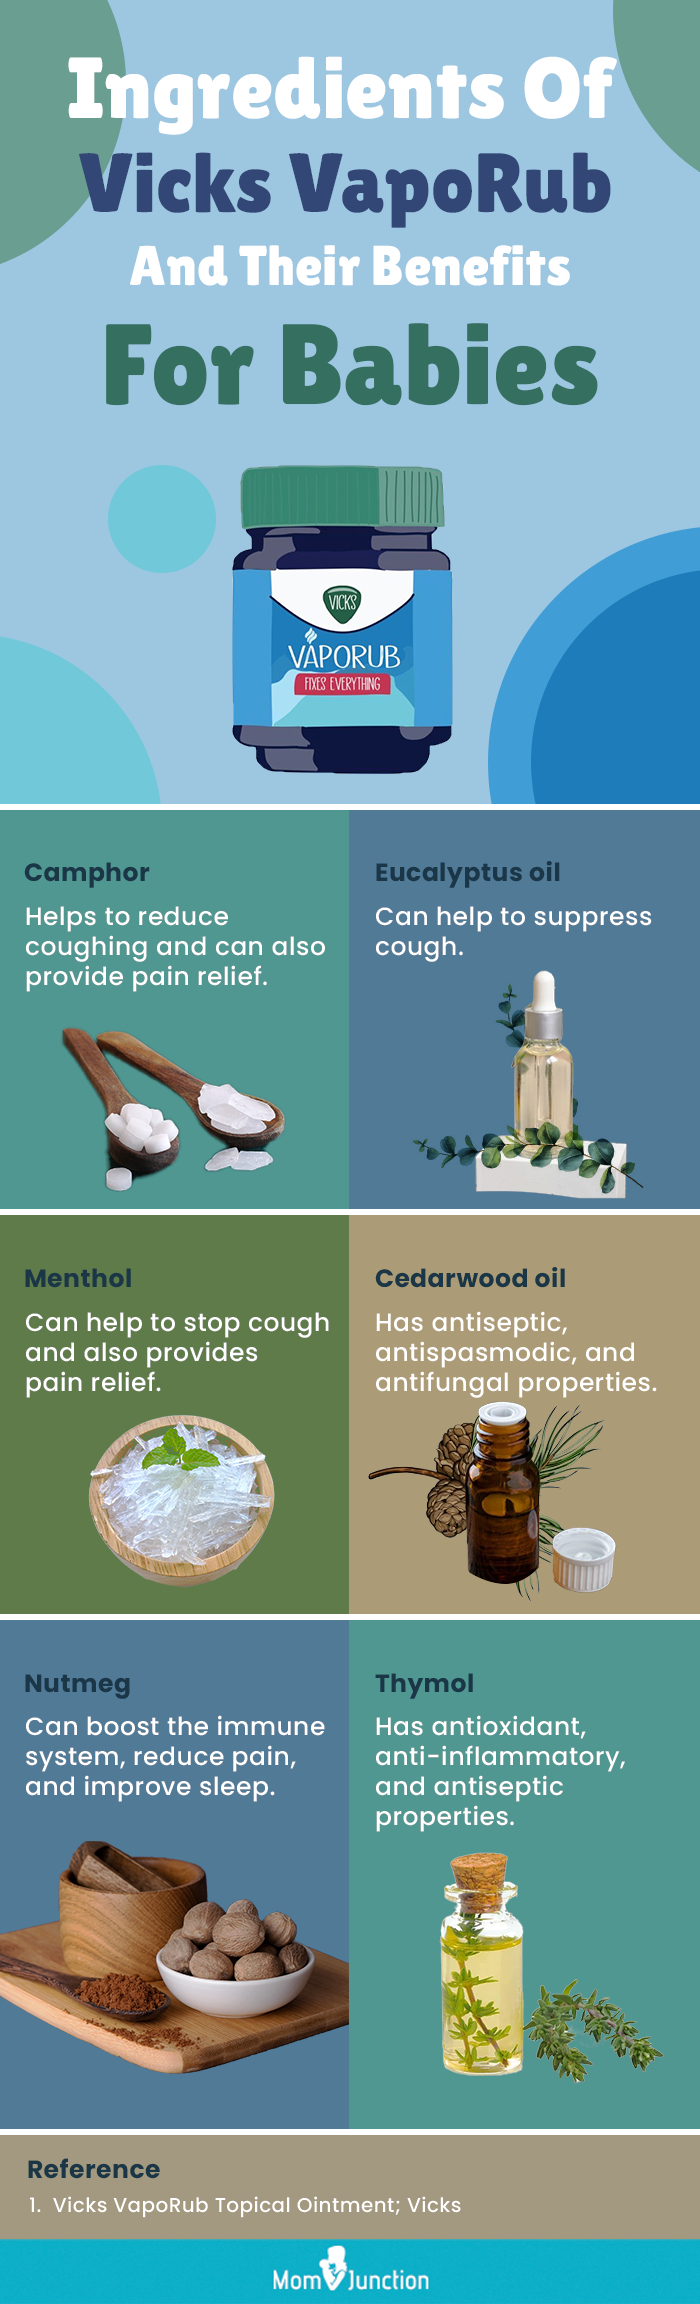 ingredients of vicks vaporub and their benefits for babies (infographic)